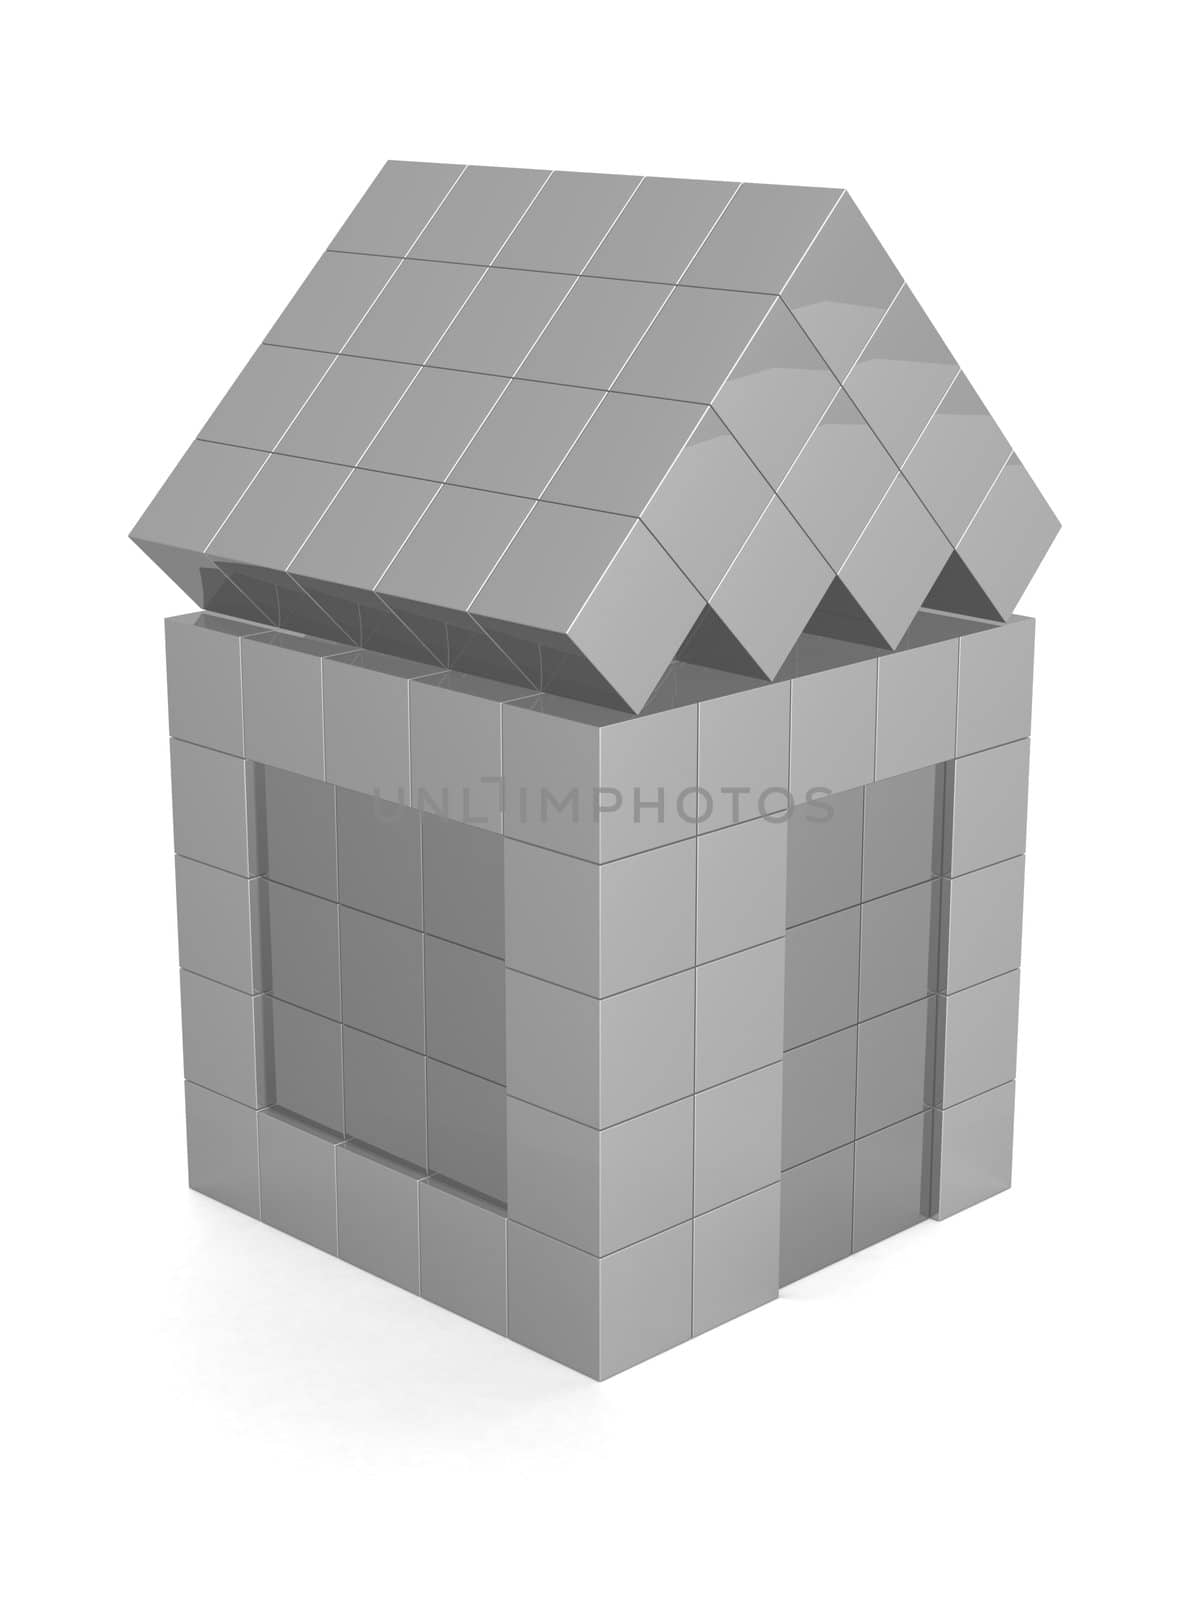 House from cubes. The isolated illustration. 3D image.